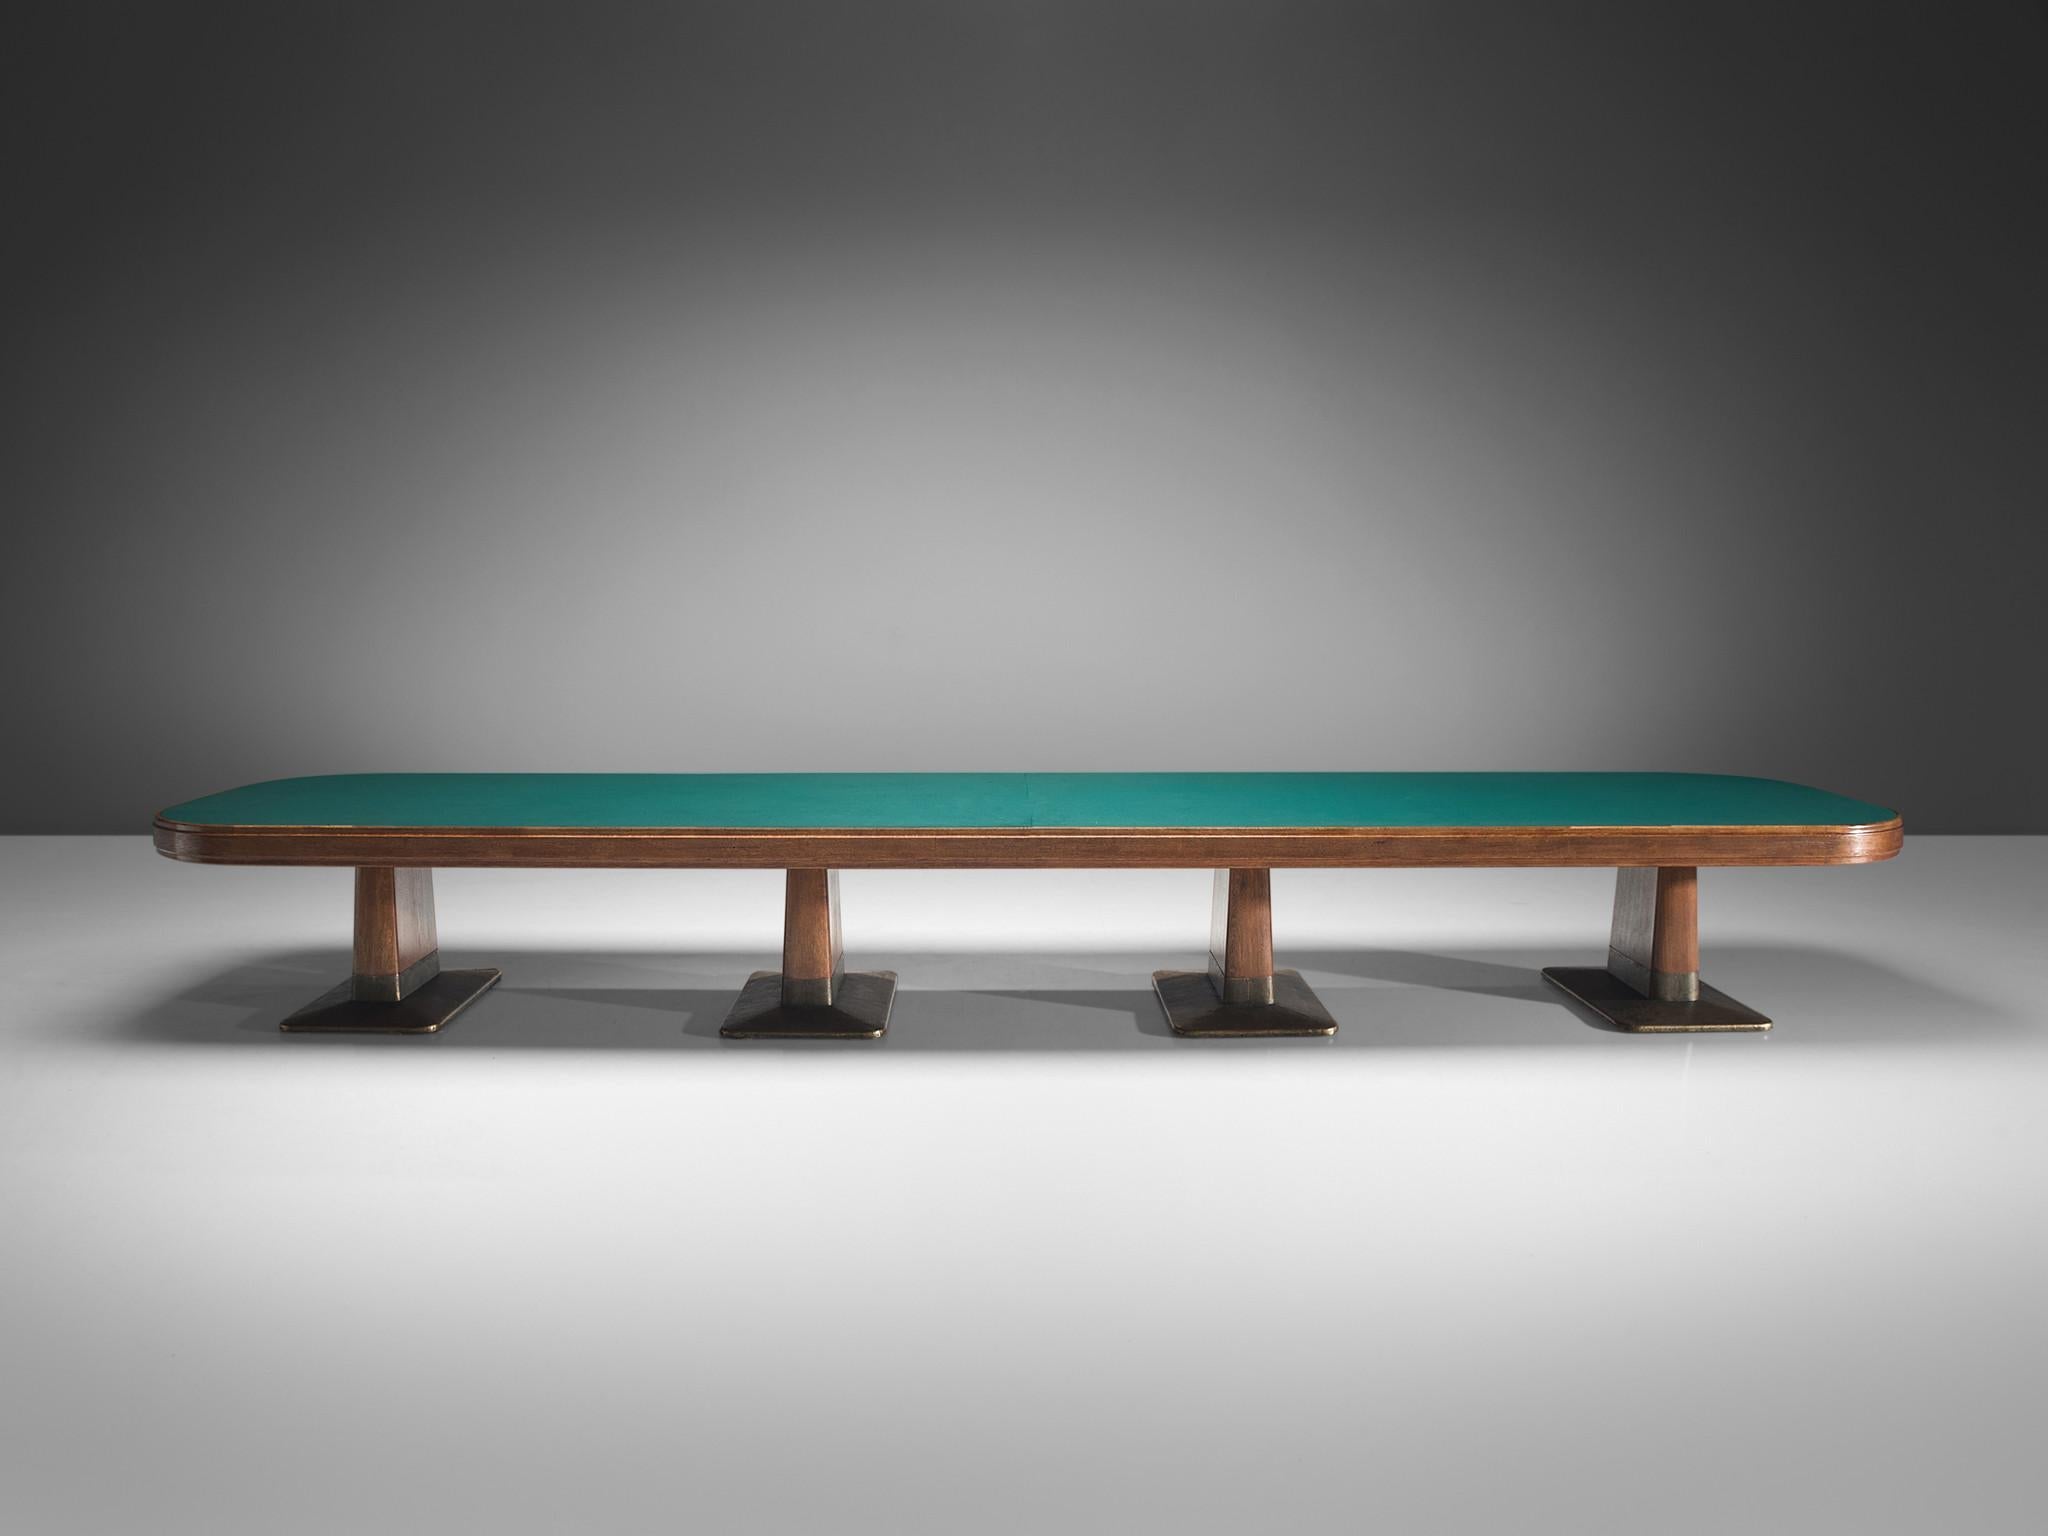 Large Conference Table in Oak and Green Felt 19ft